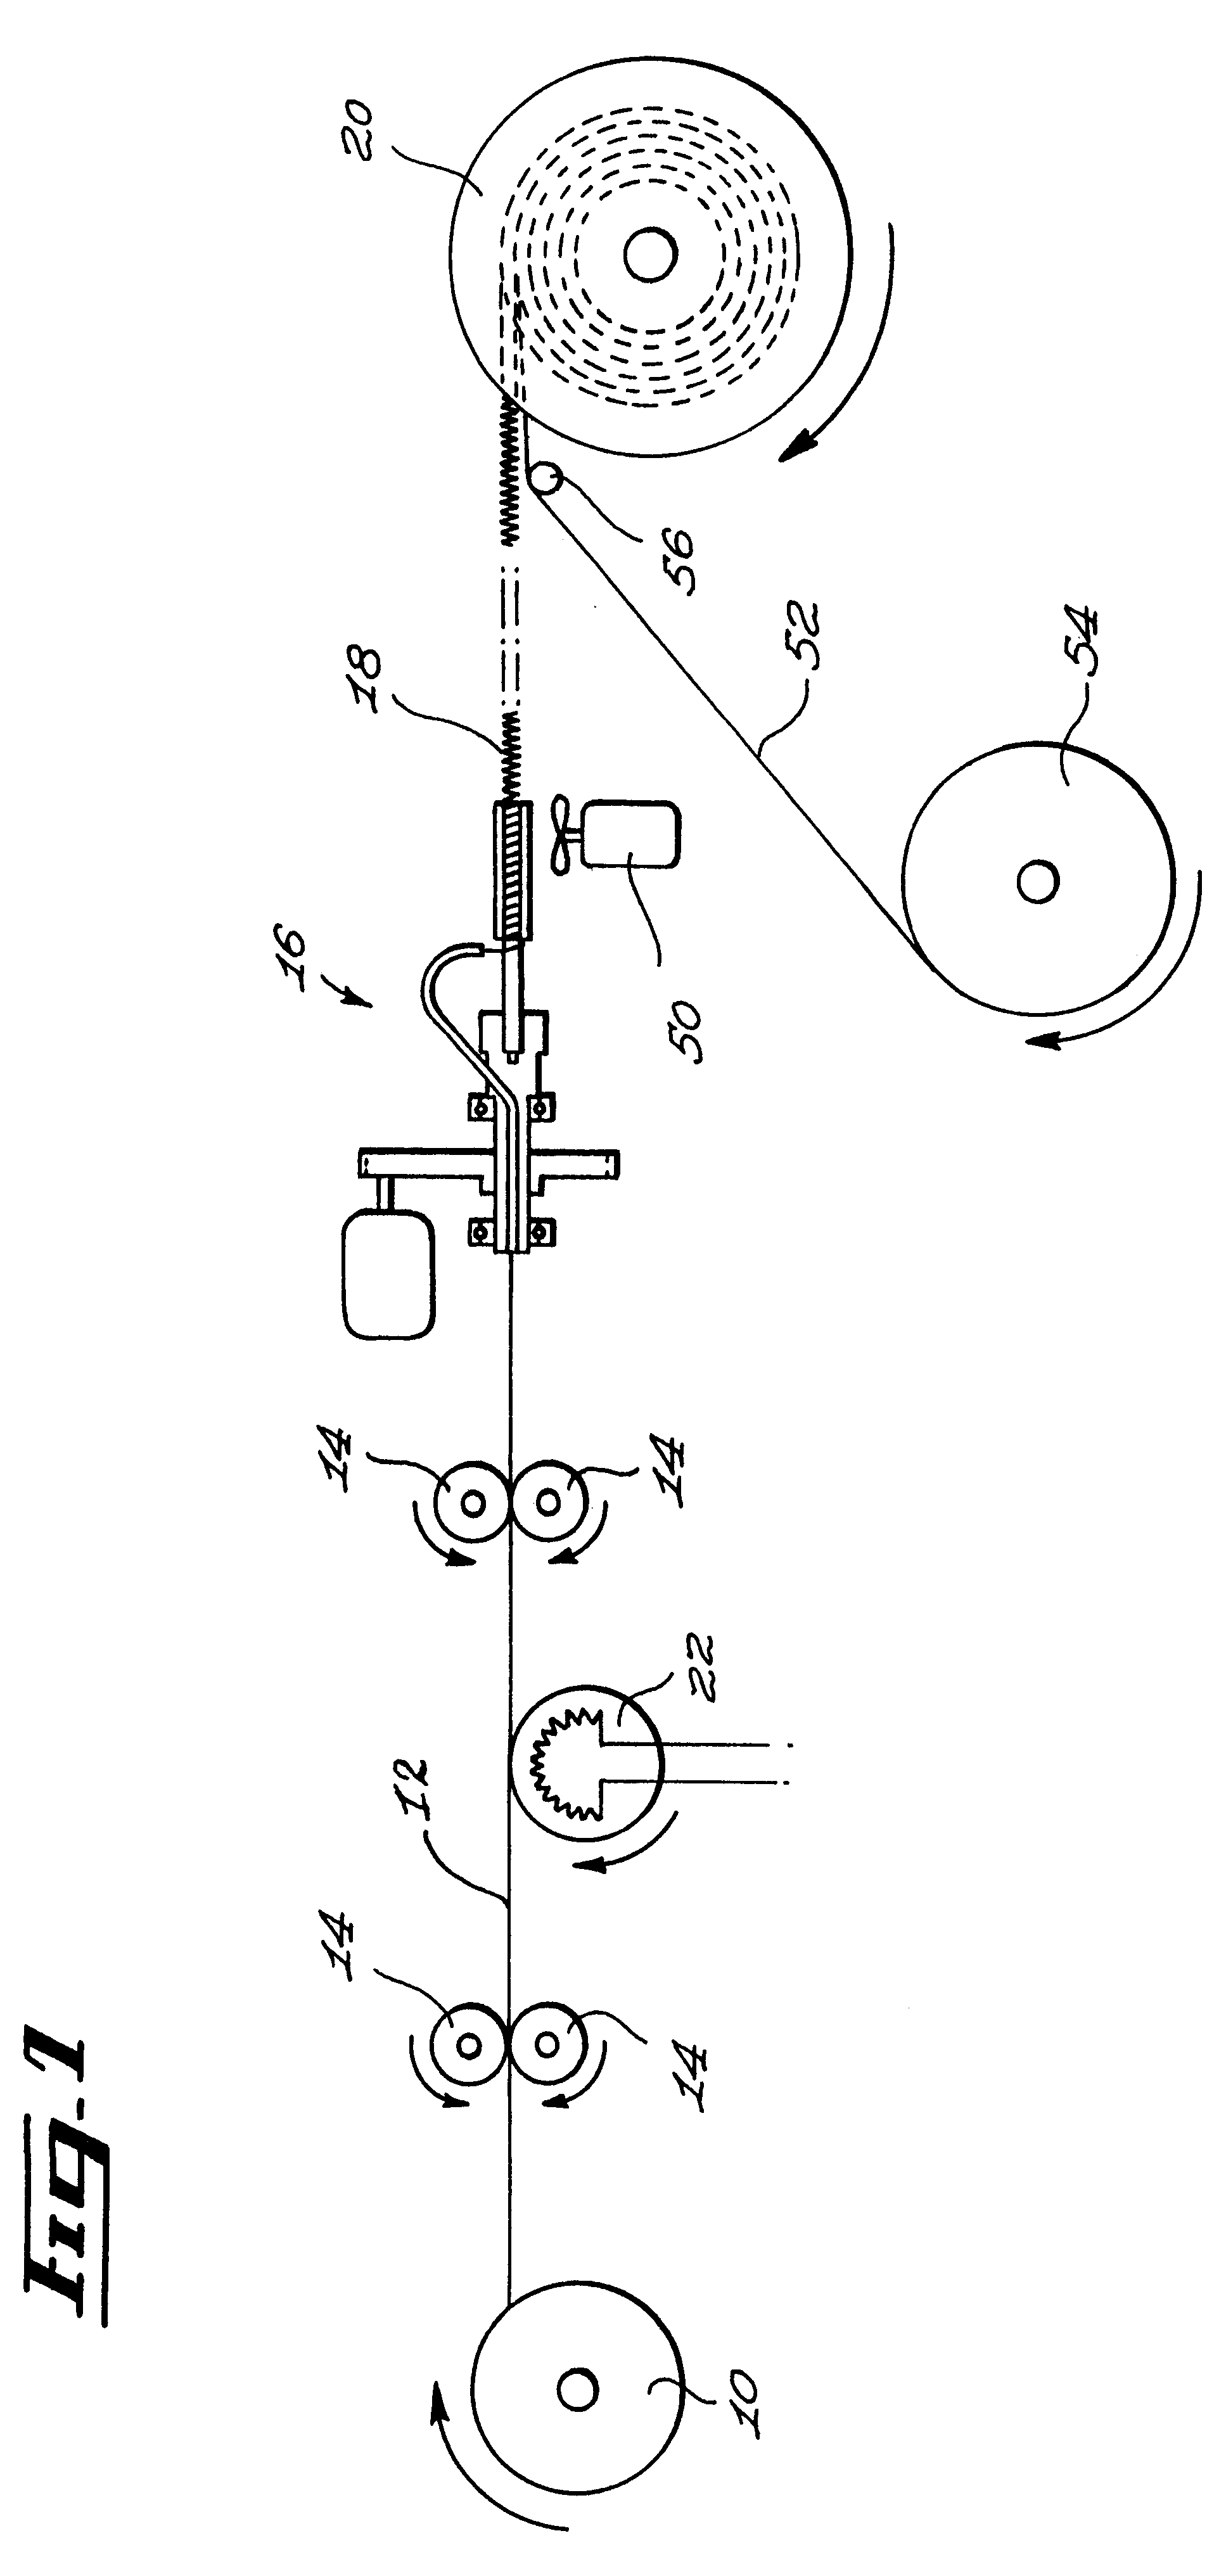 Method and apparatus for forming plastic coils